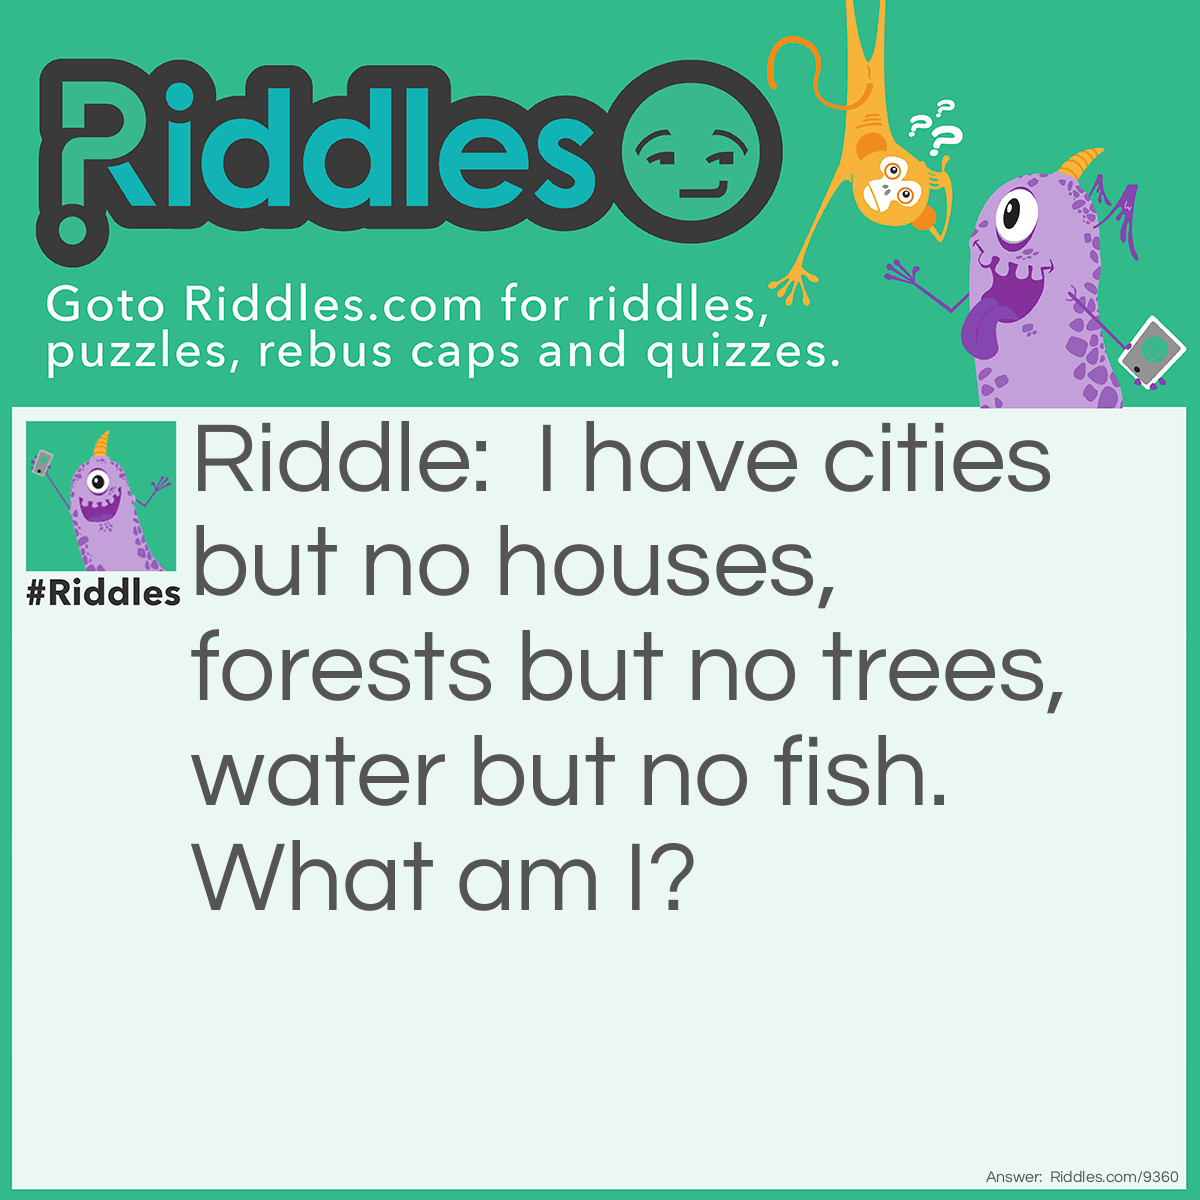 Riddle: I have cities but no houses, forests but no trees, water but no fish. What am I? Answer: A Map!